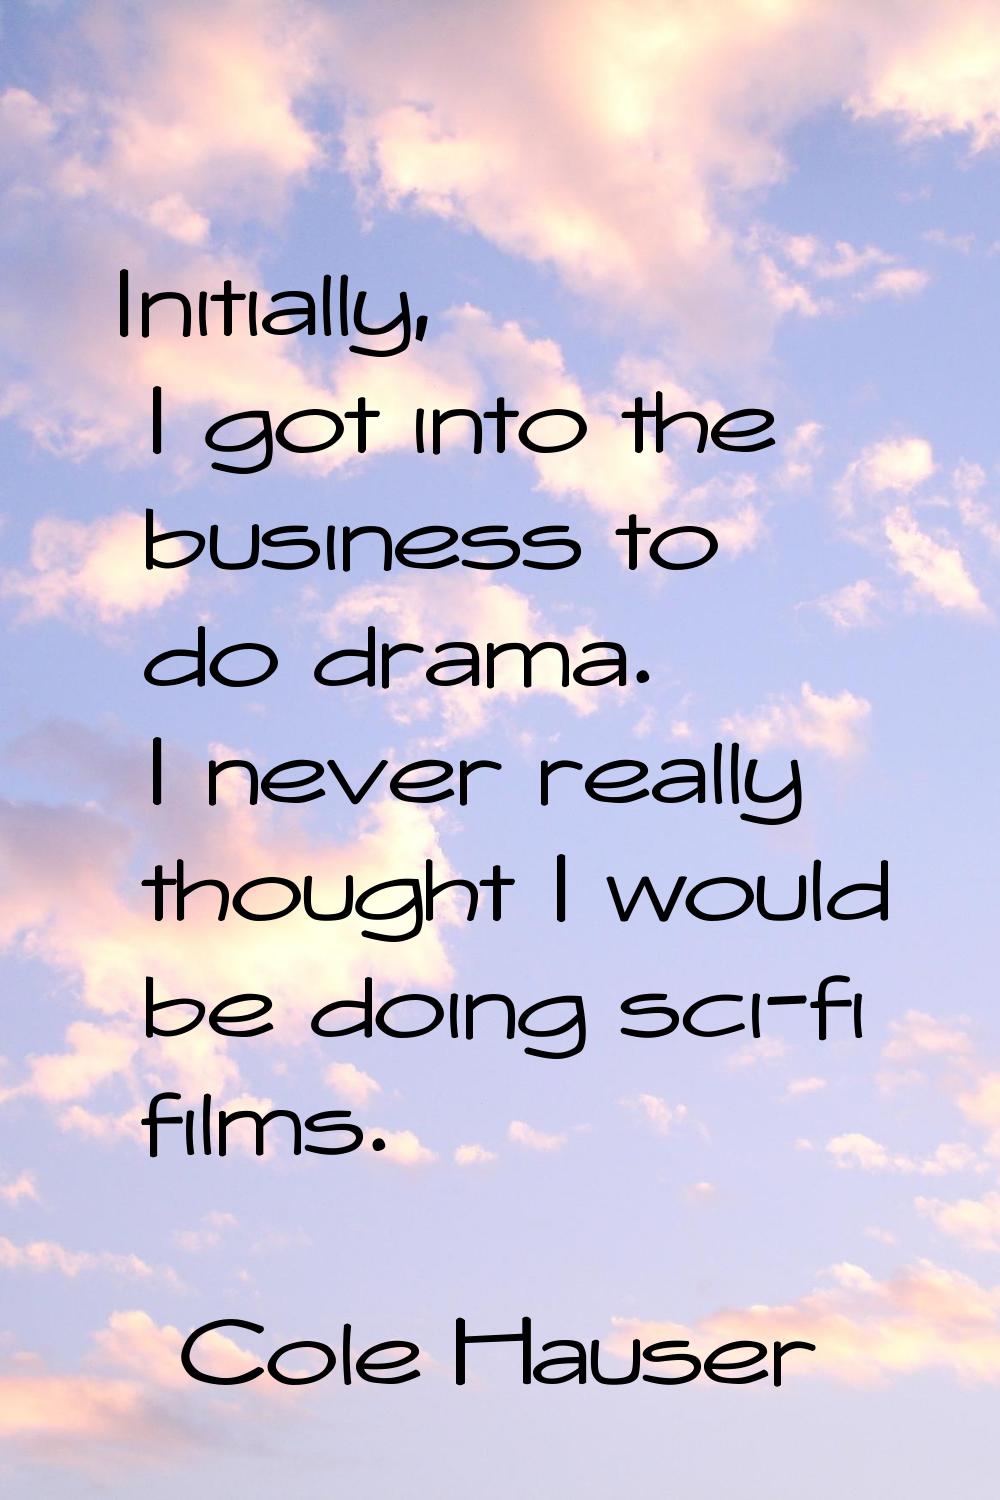 Initially, I got into the business to do drama. I never really thought I would be doing sci-fi film